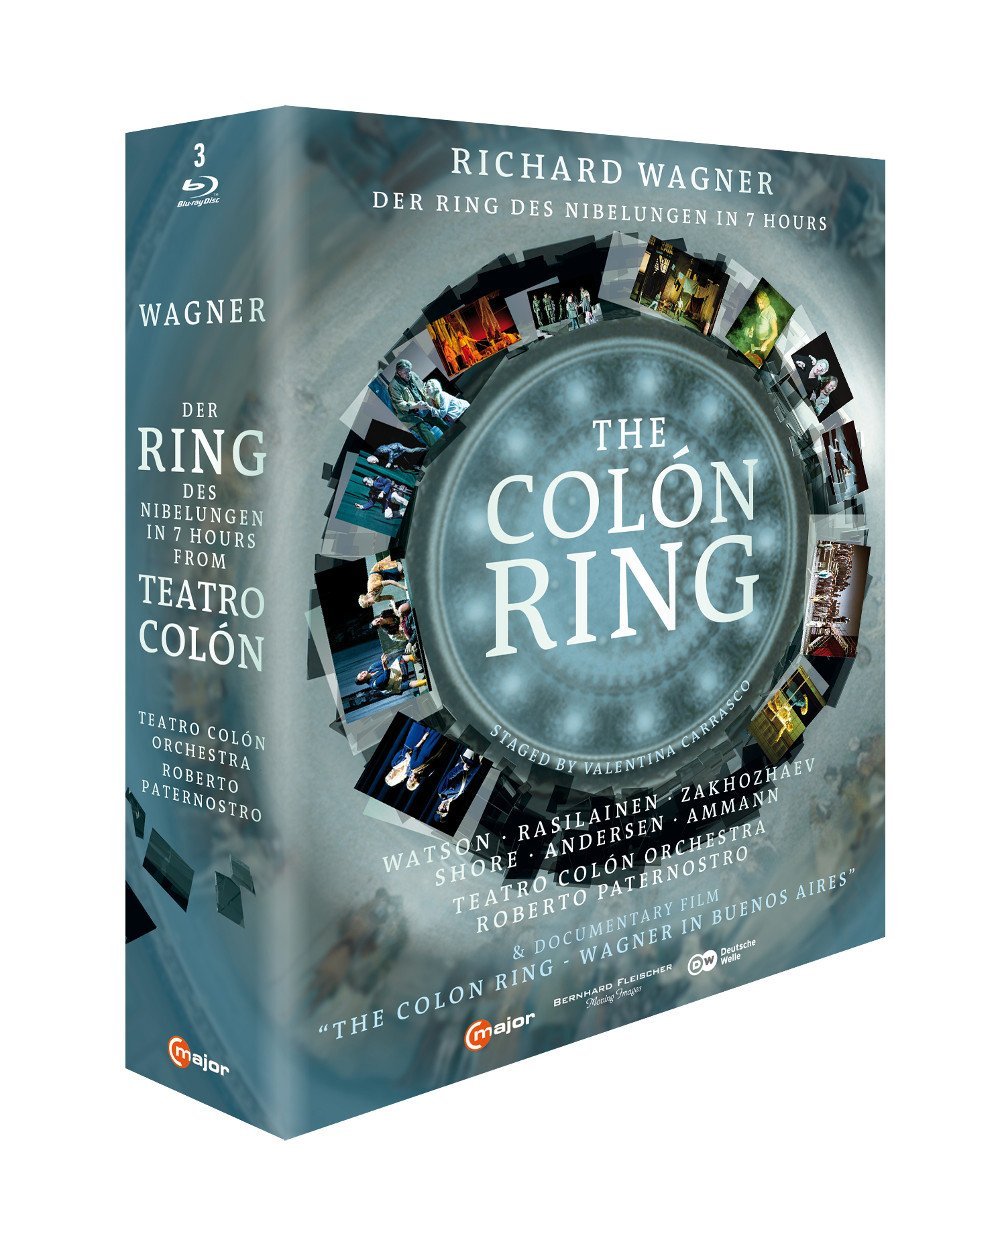 Colón Ring' released for Wagner's bicentenary | Gramophone